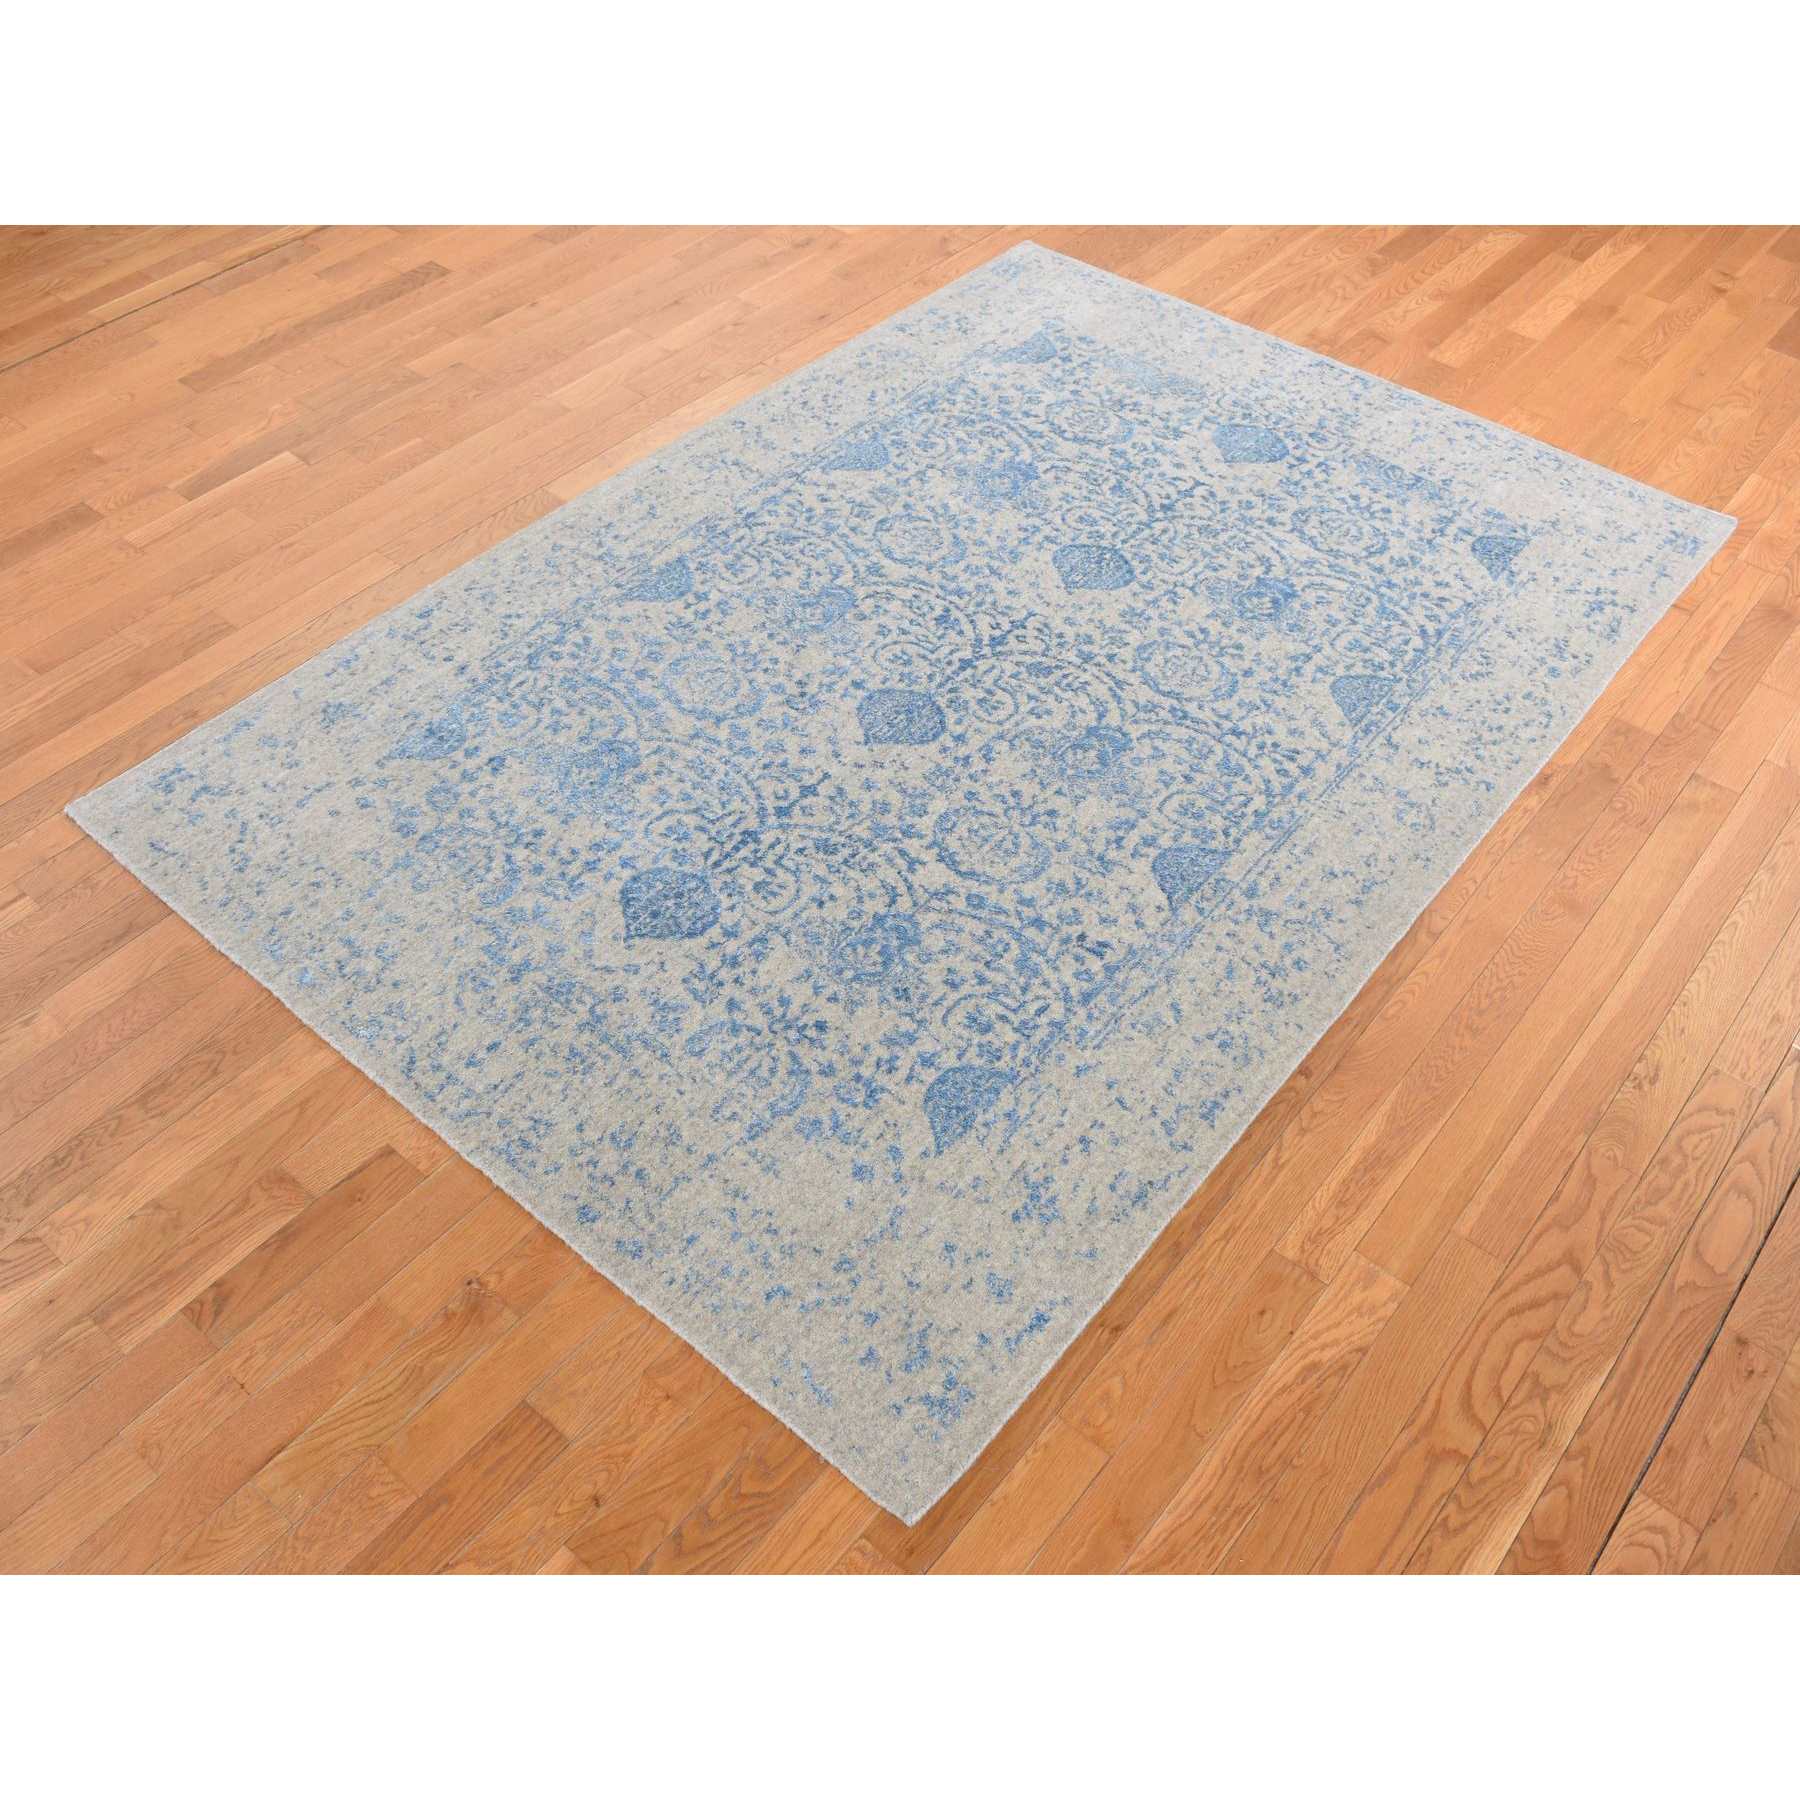 Modern-and-Contemporary-Hand-Loomed-Rug-435095